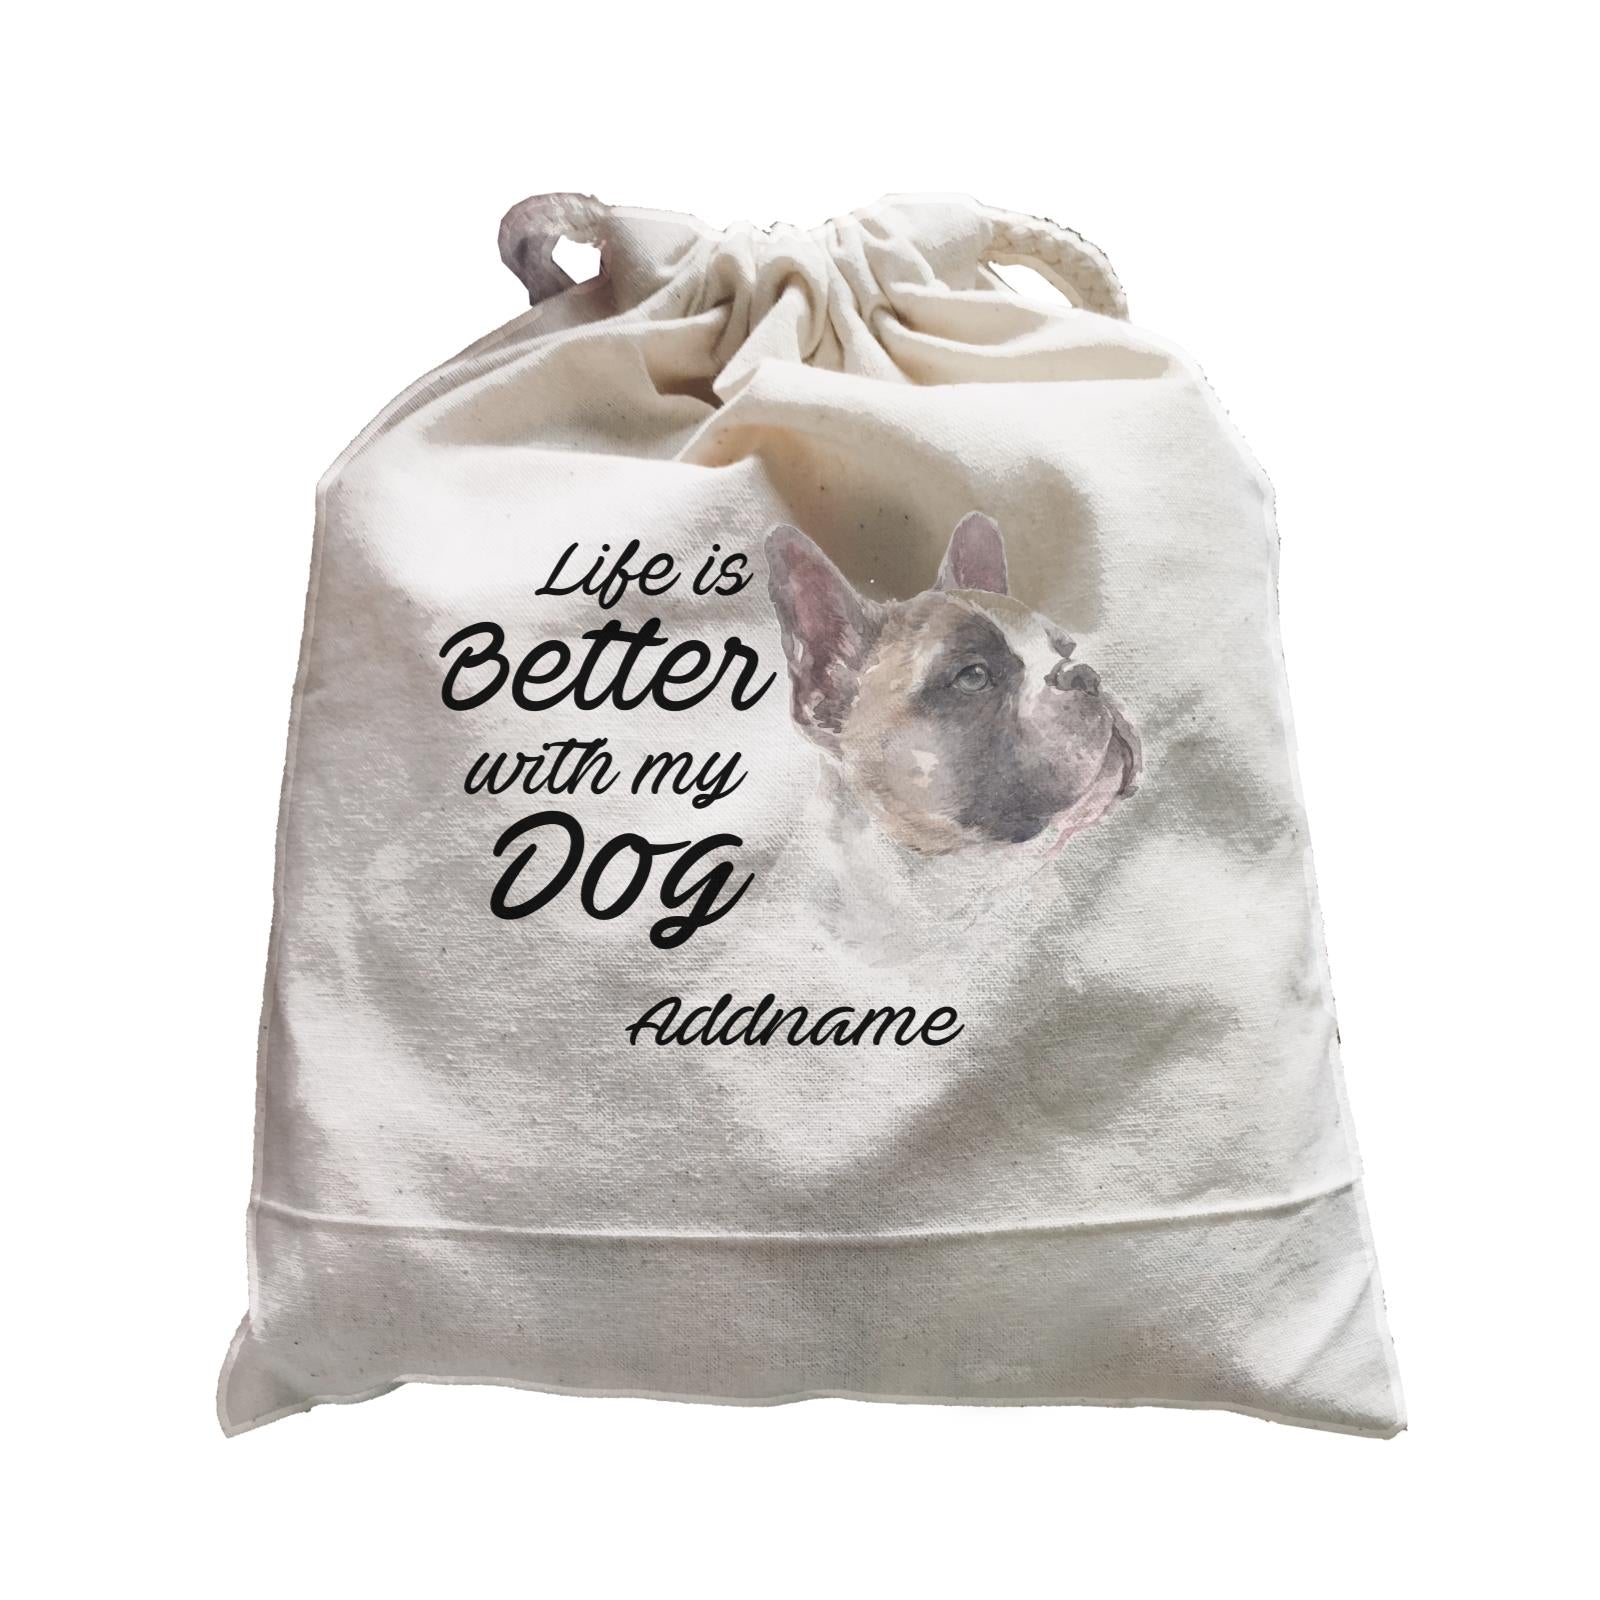 Watercolor Life is Better With My Dog French BulldogAddname Satchel